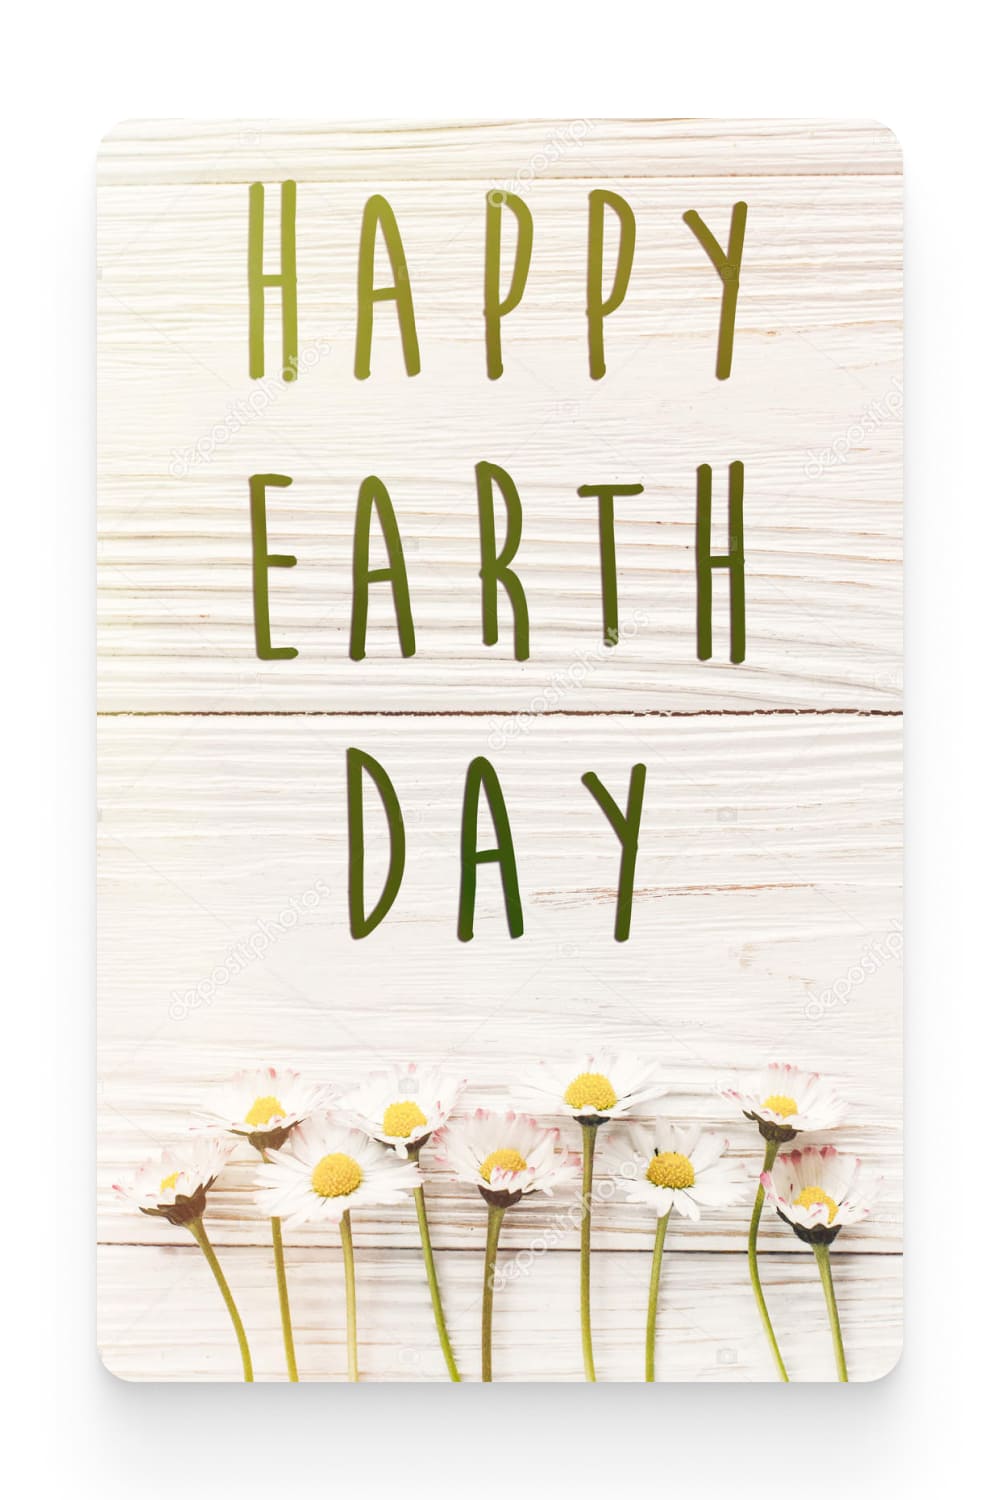 Happy earth day text sign on beautiful daisy flowers on rustic white wooden background top view. greeting card. environmental concept.